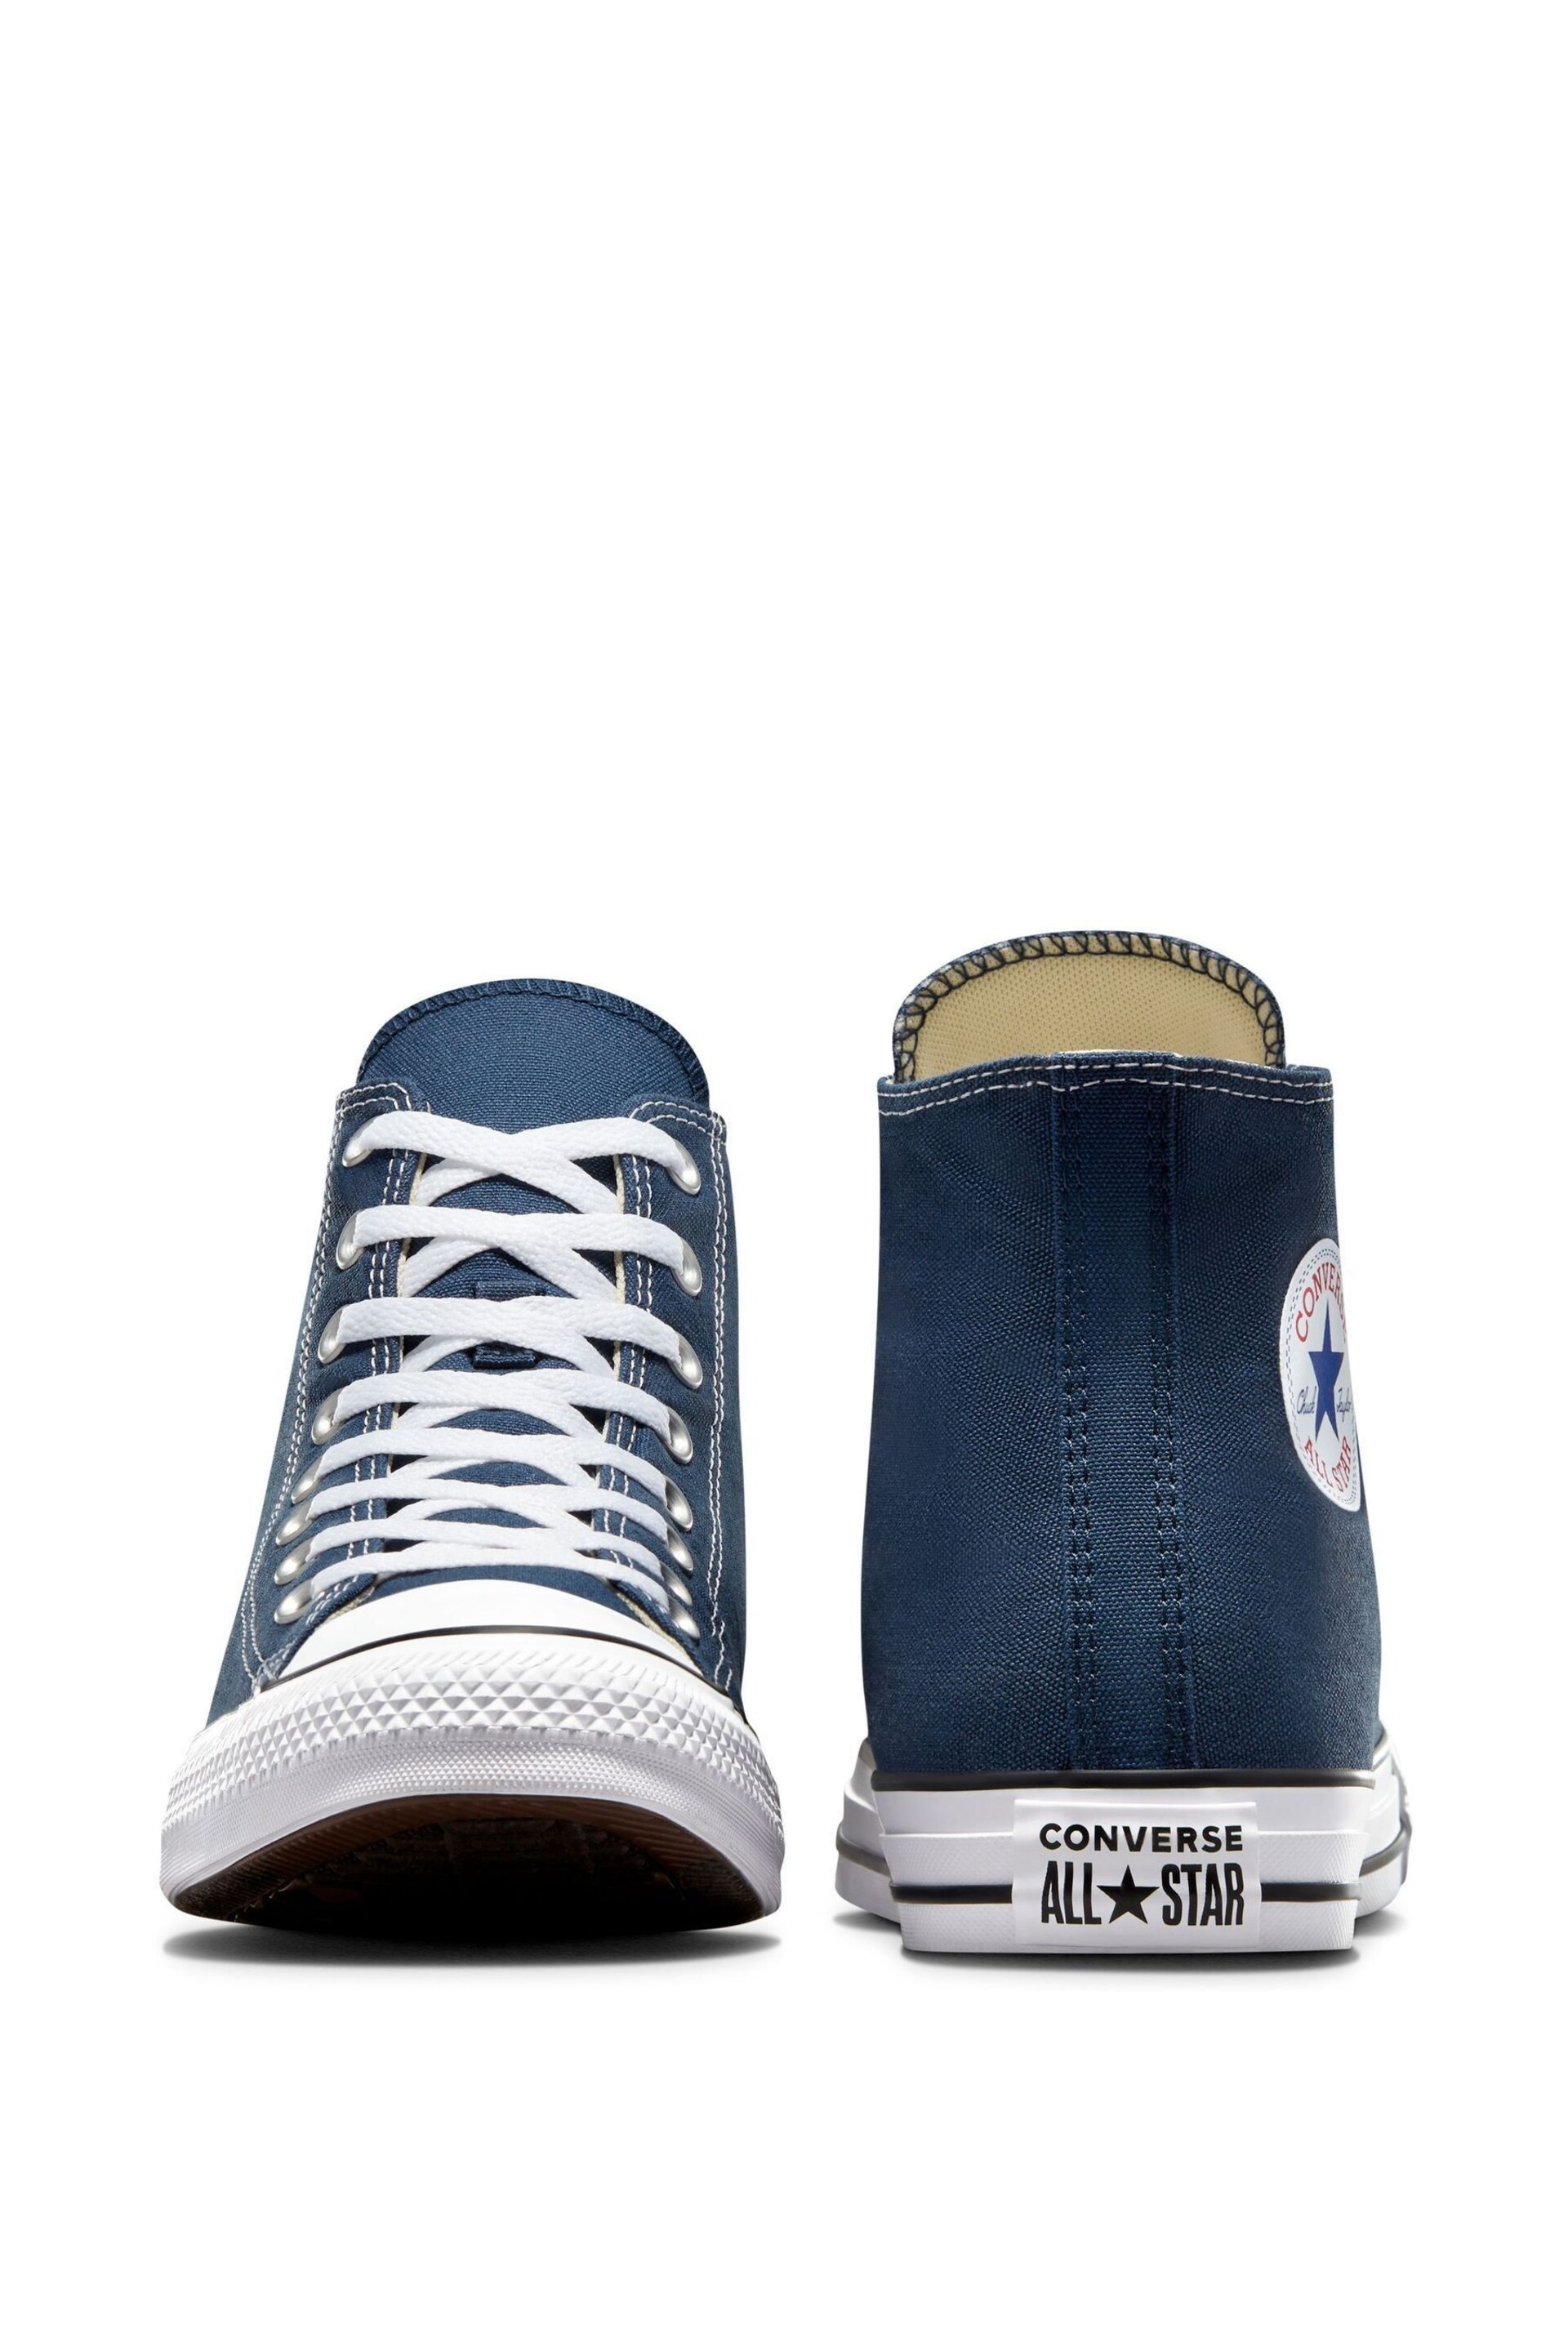 Converse Navy Regular Fit Chuck Taylor All Star High Trainers - Image 8 of 11